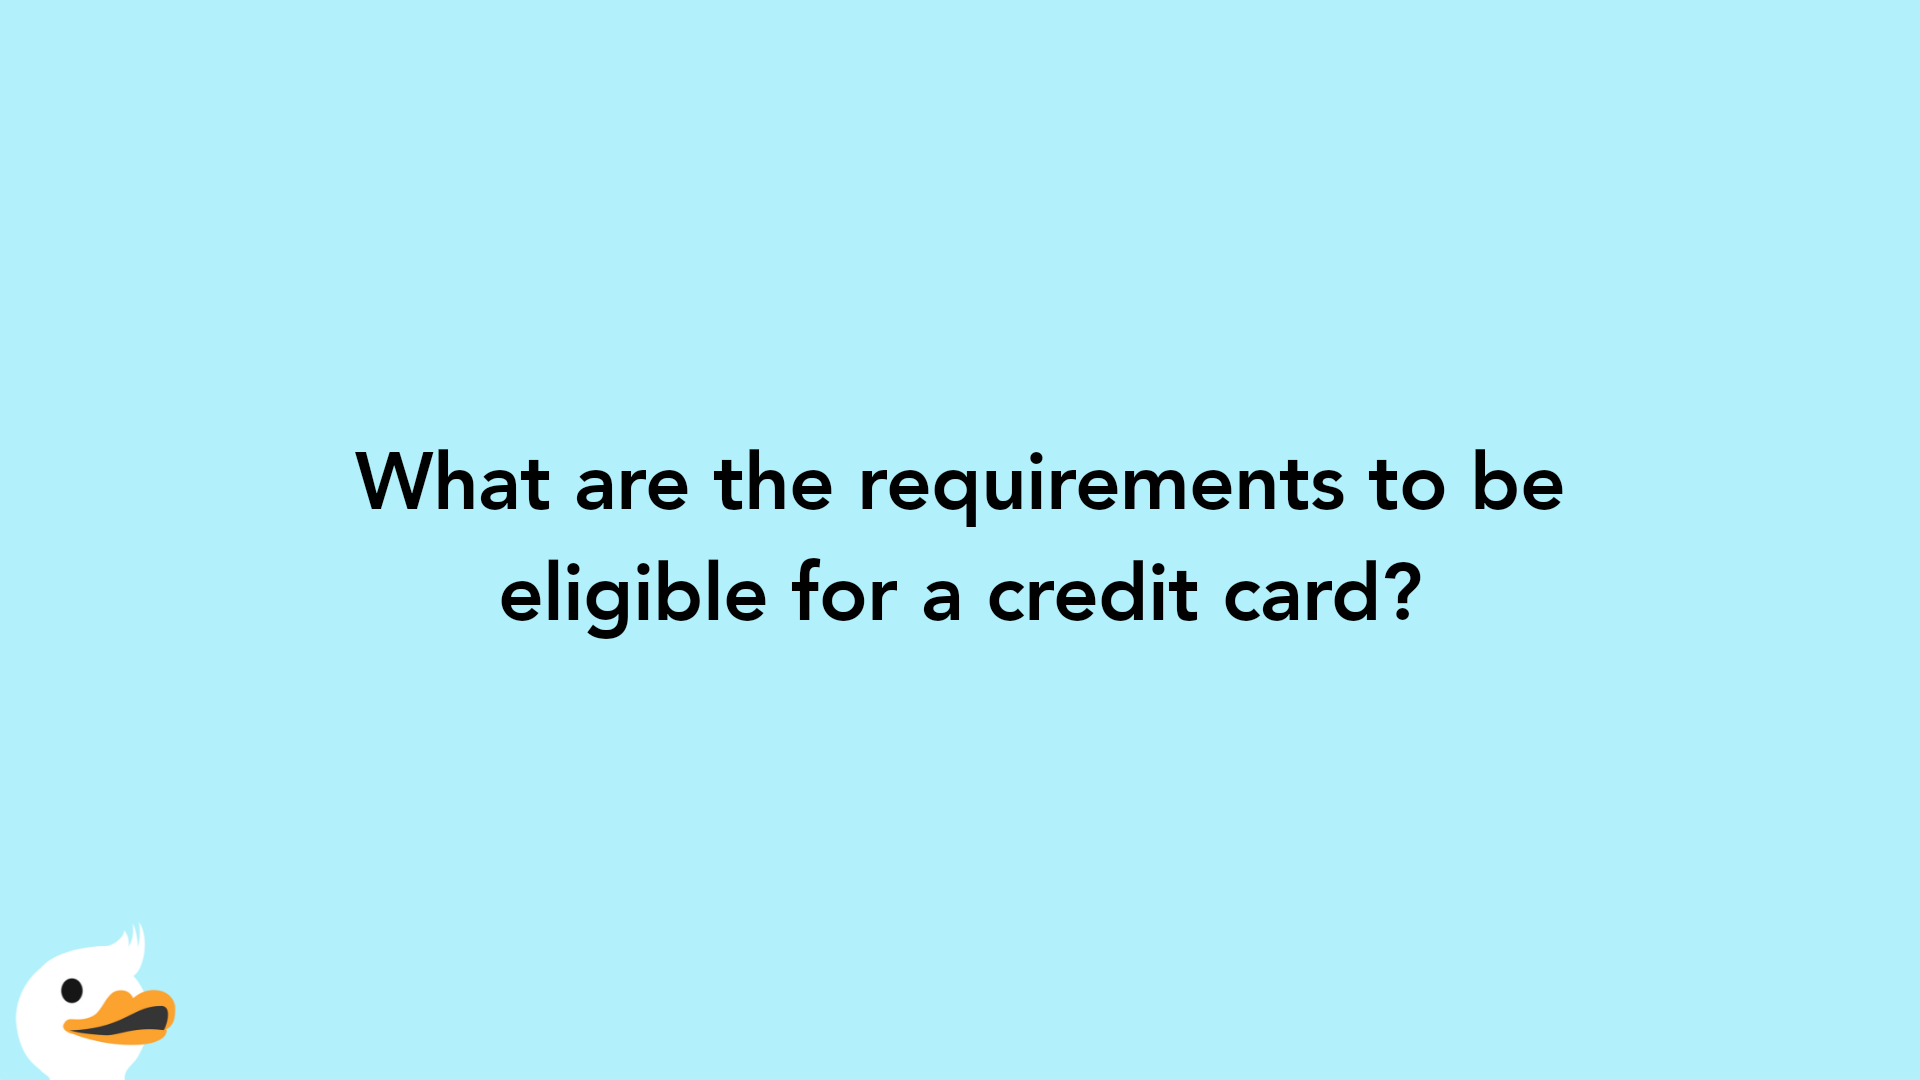 What are the requirements to be eligible for a credit card?